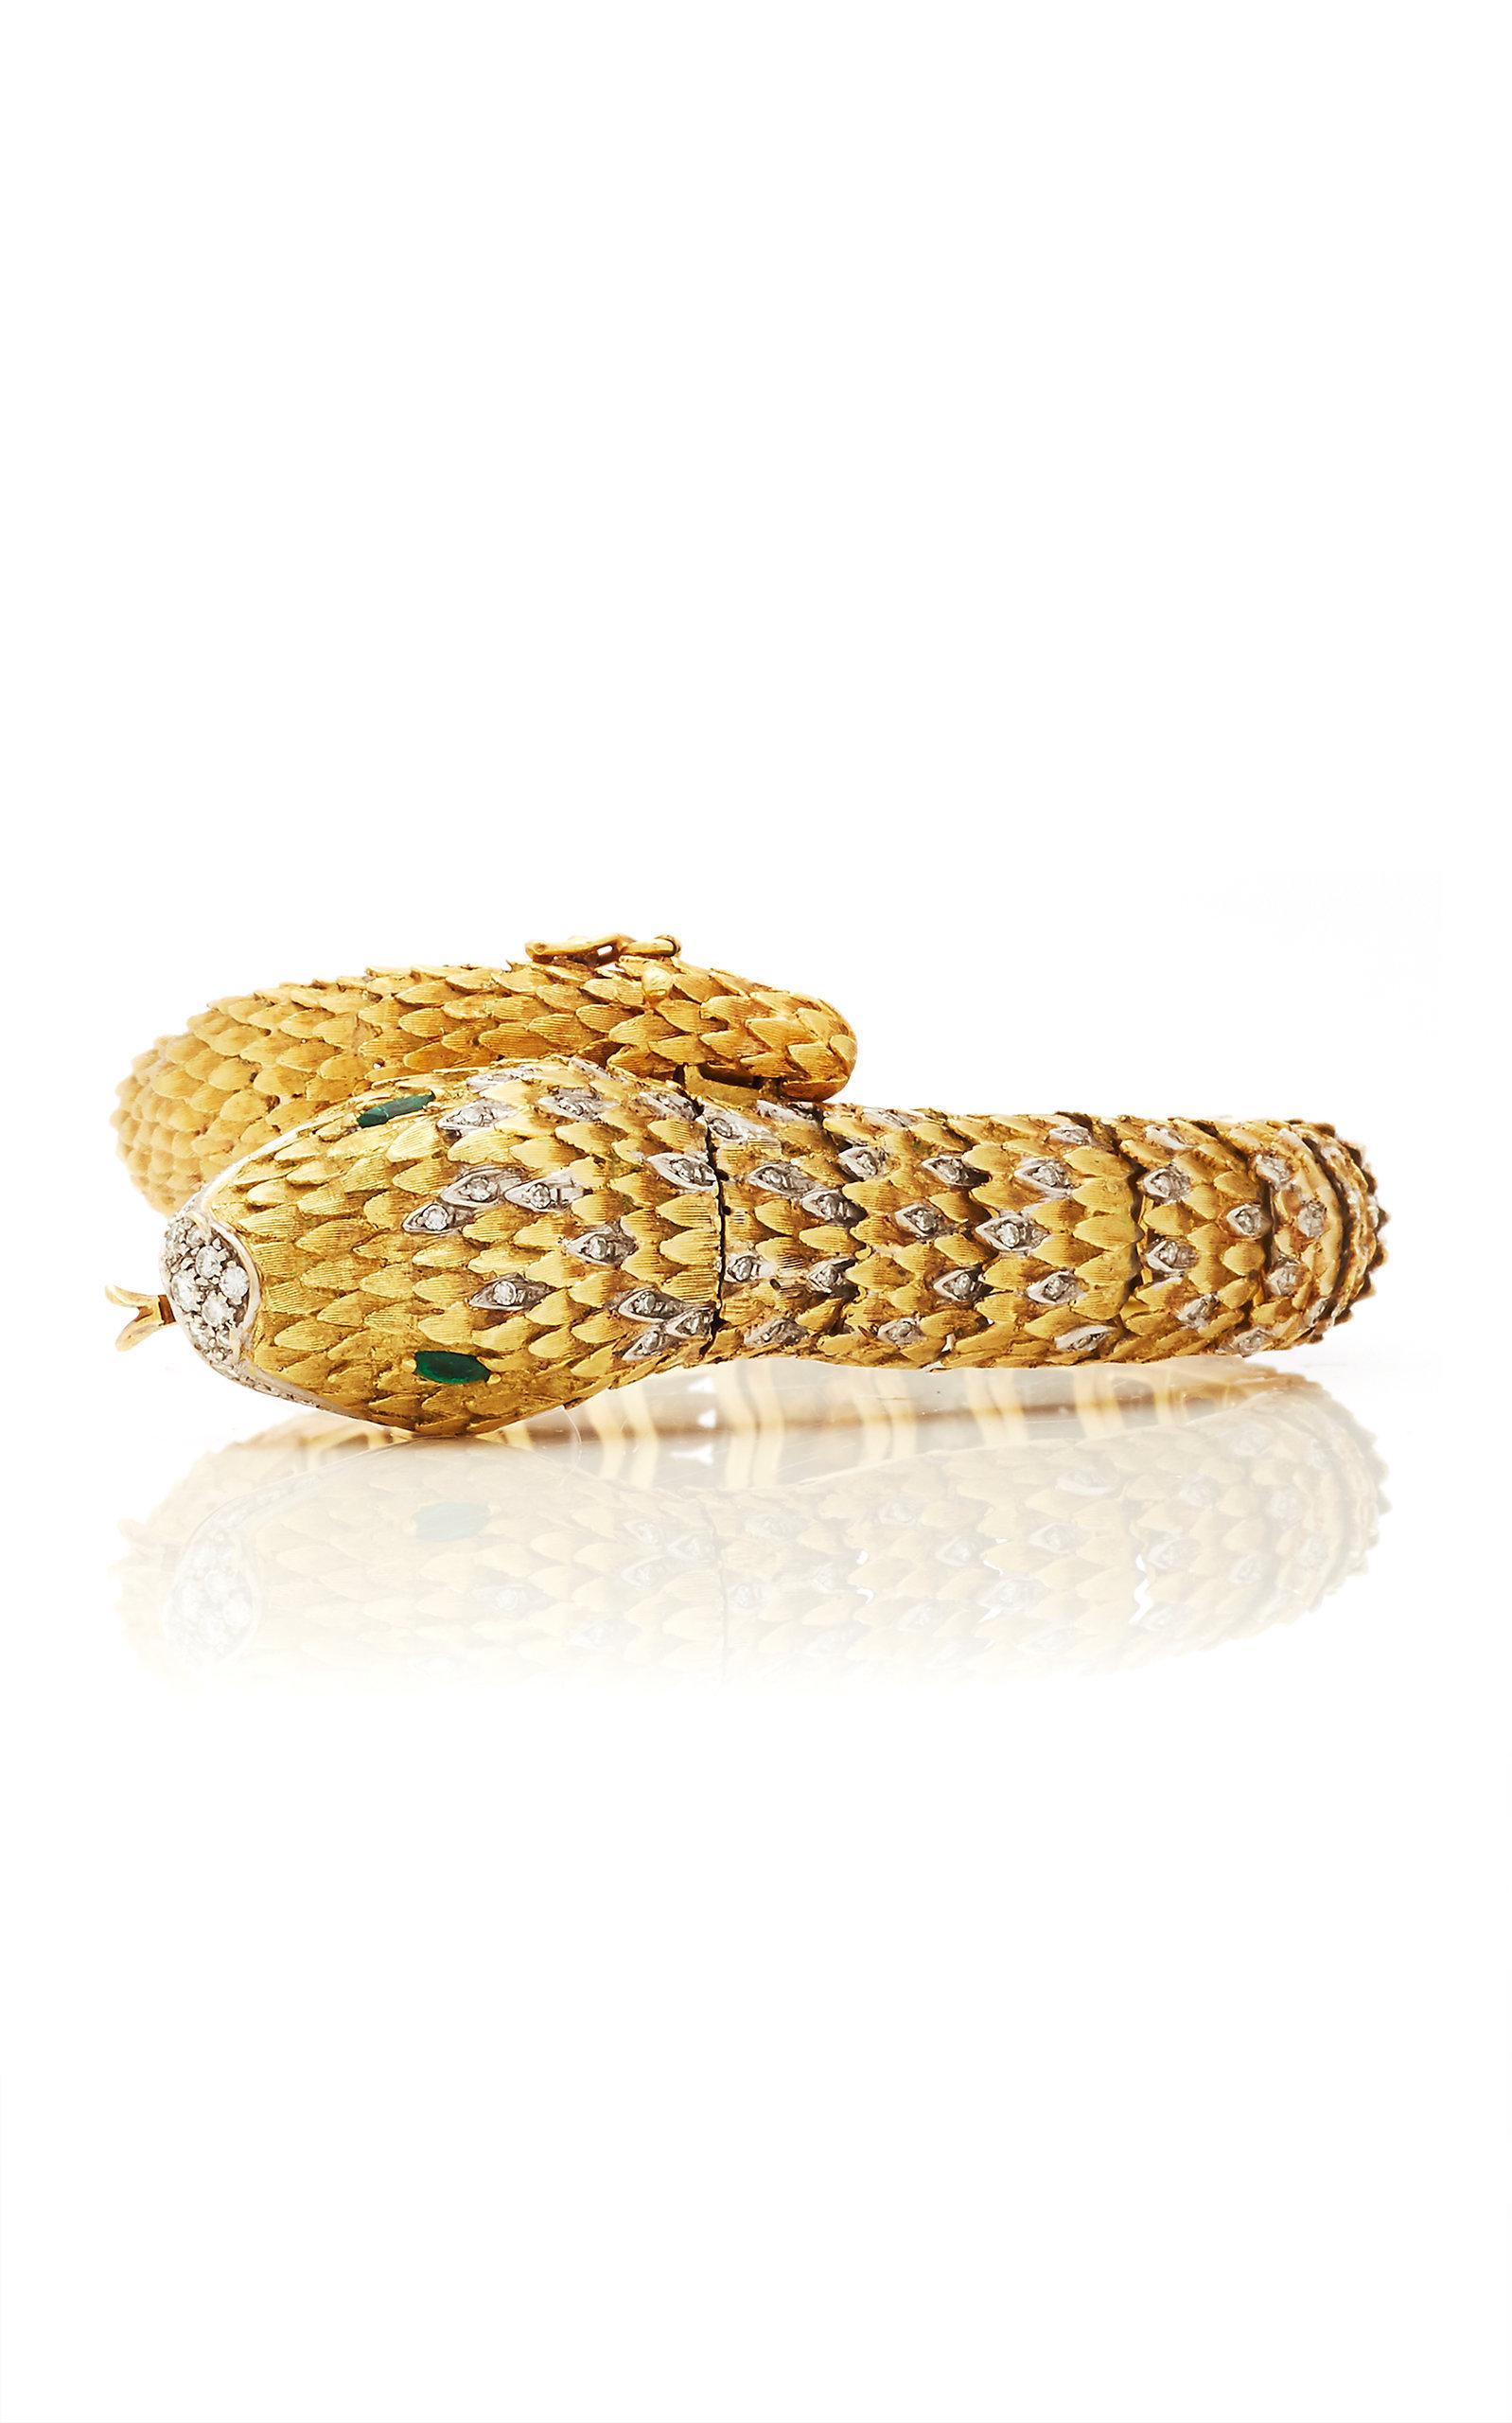 A One of A Kind Two-Color Gold, Diamond and Emeralds Serpent Bracelet-Watch by Movado, circa 1970.
